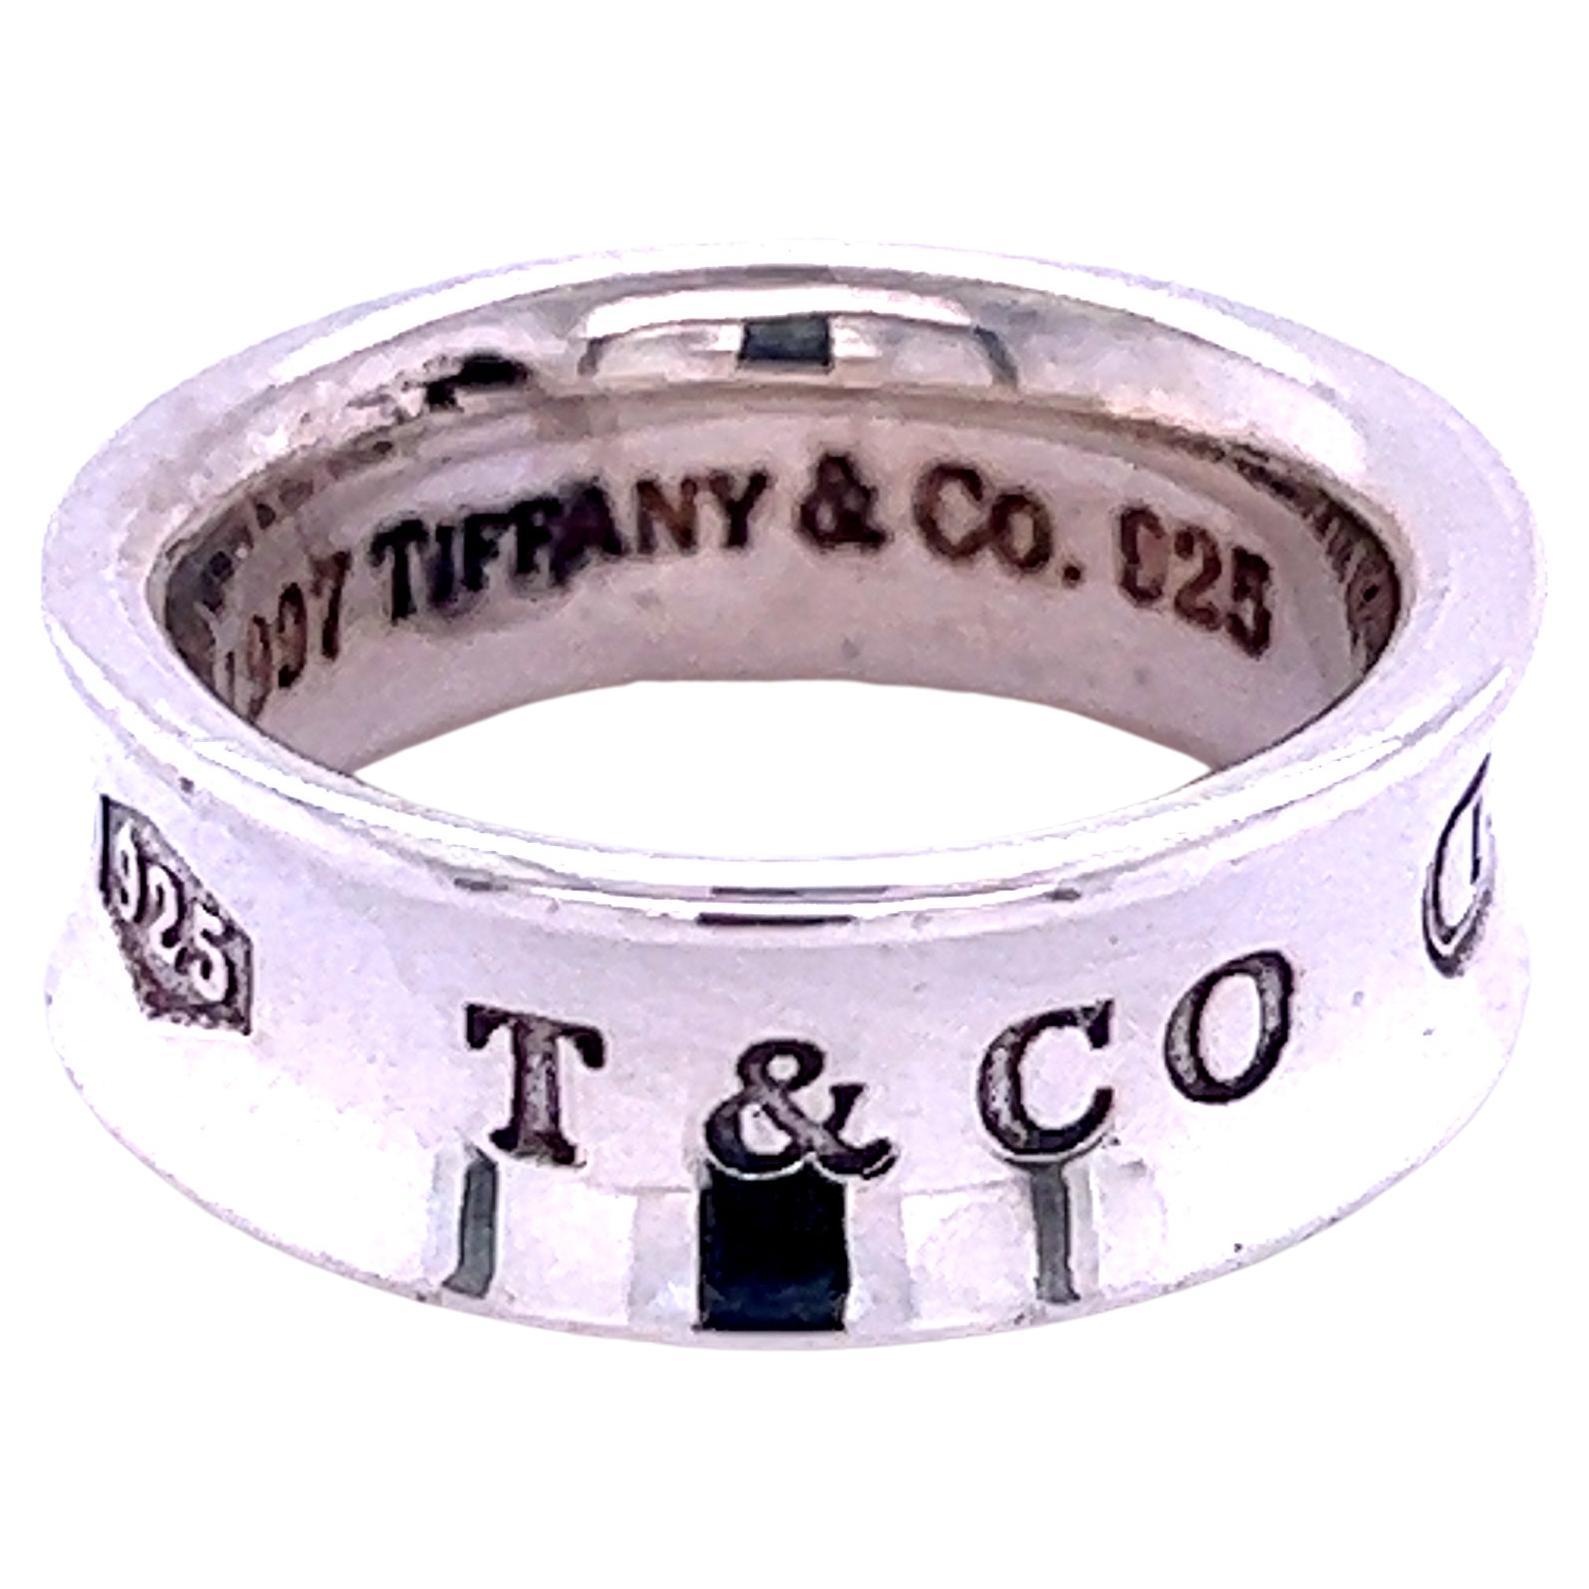 Tiffany & Co Estate 1837 Concave Band Size 4 Silver 7 mm For Sale